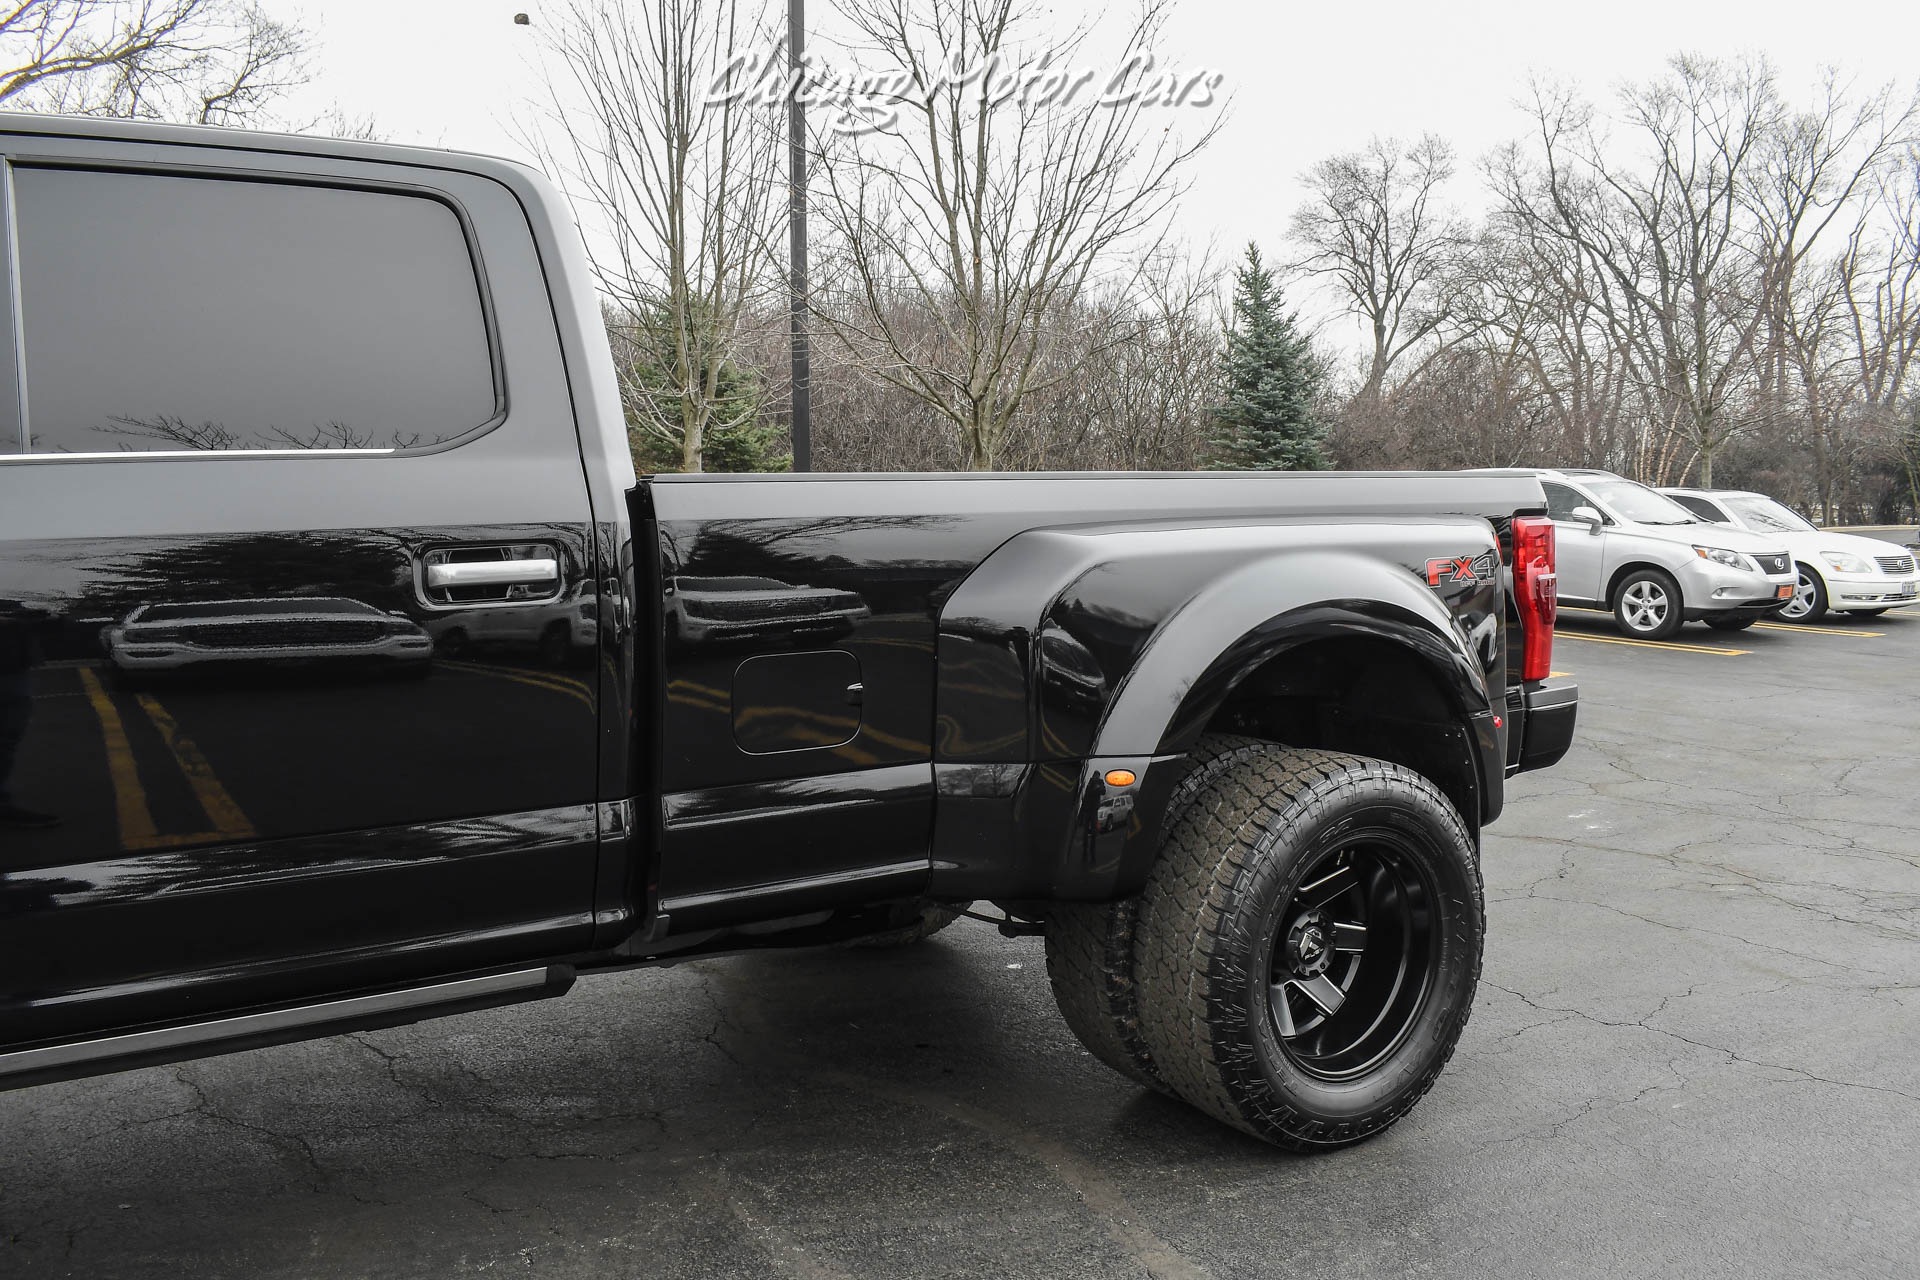 Used-2019-Ford-F-350-Super-Duty-Limited-Lifted-and-Upgraded-Wheels-PowerStroke-67L-Diesel